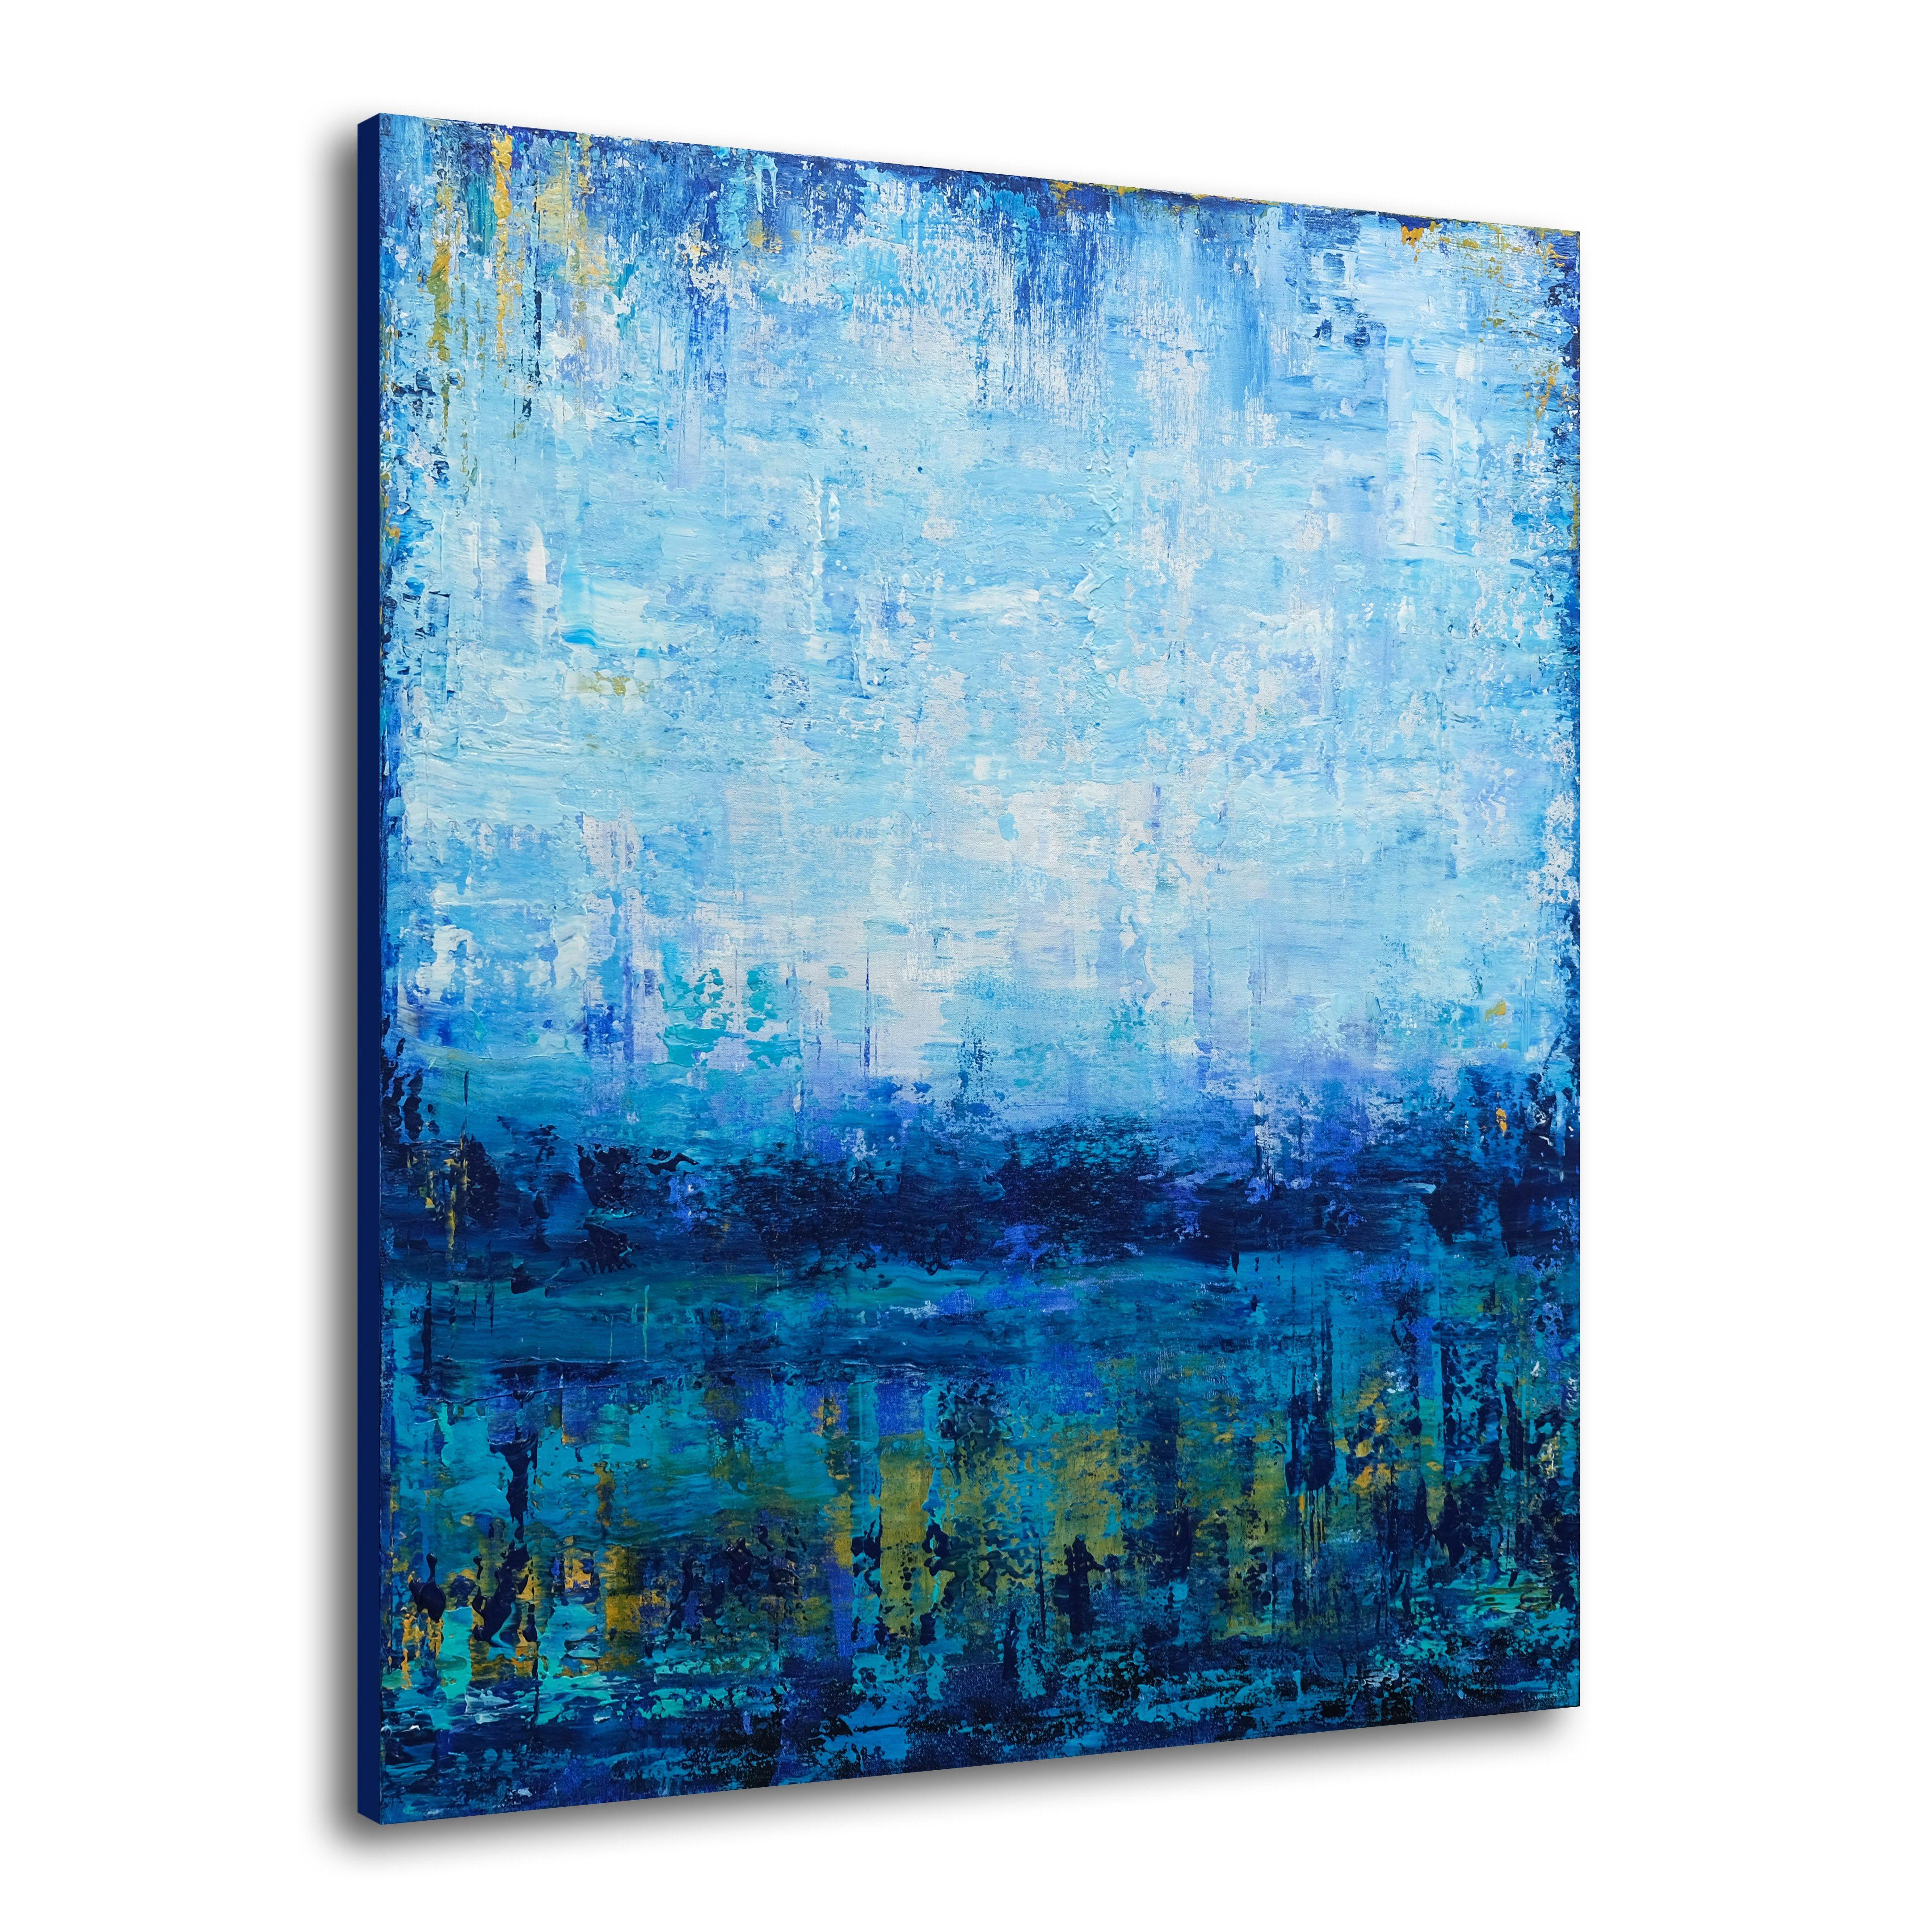 Dimensions: 81x100 cm “ 31,89x39,37 inches. Original abstract painting with textures inspired by the Mediterranean Sea. It was painted in multiple layers with palette knife and brushes. * The artwork is signed on the back and includes a Certificate